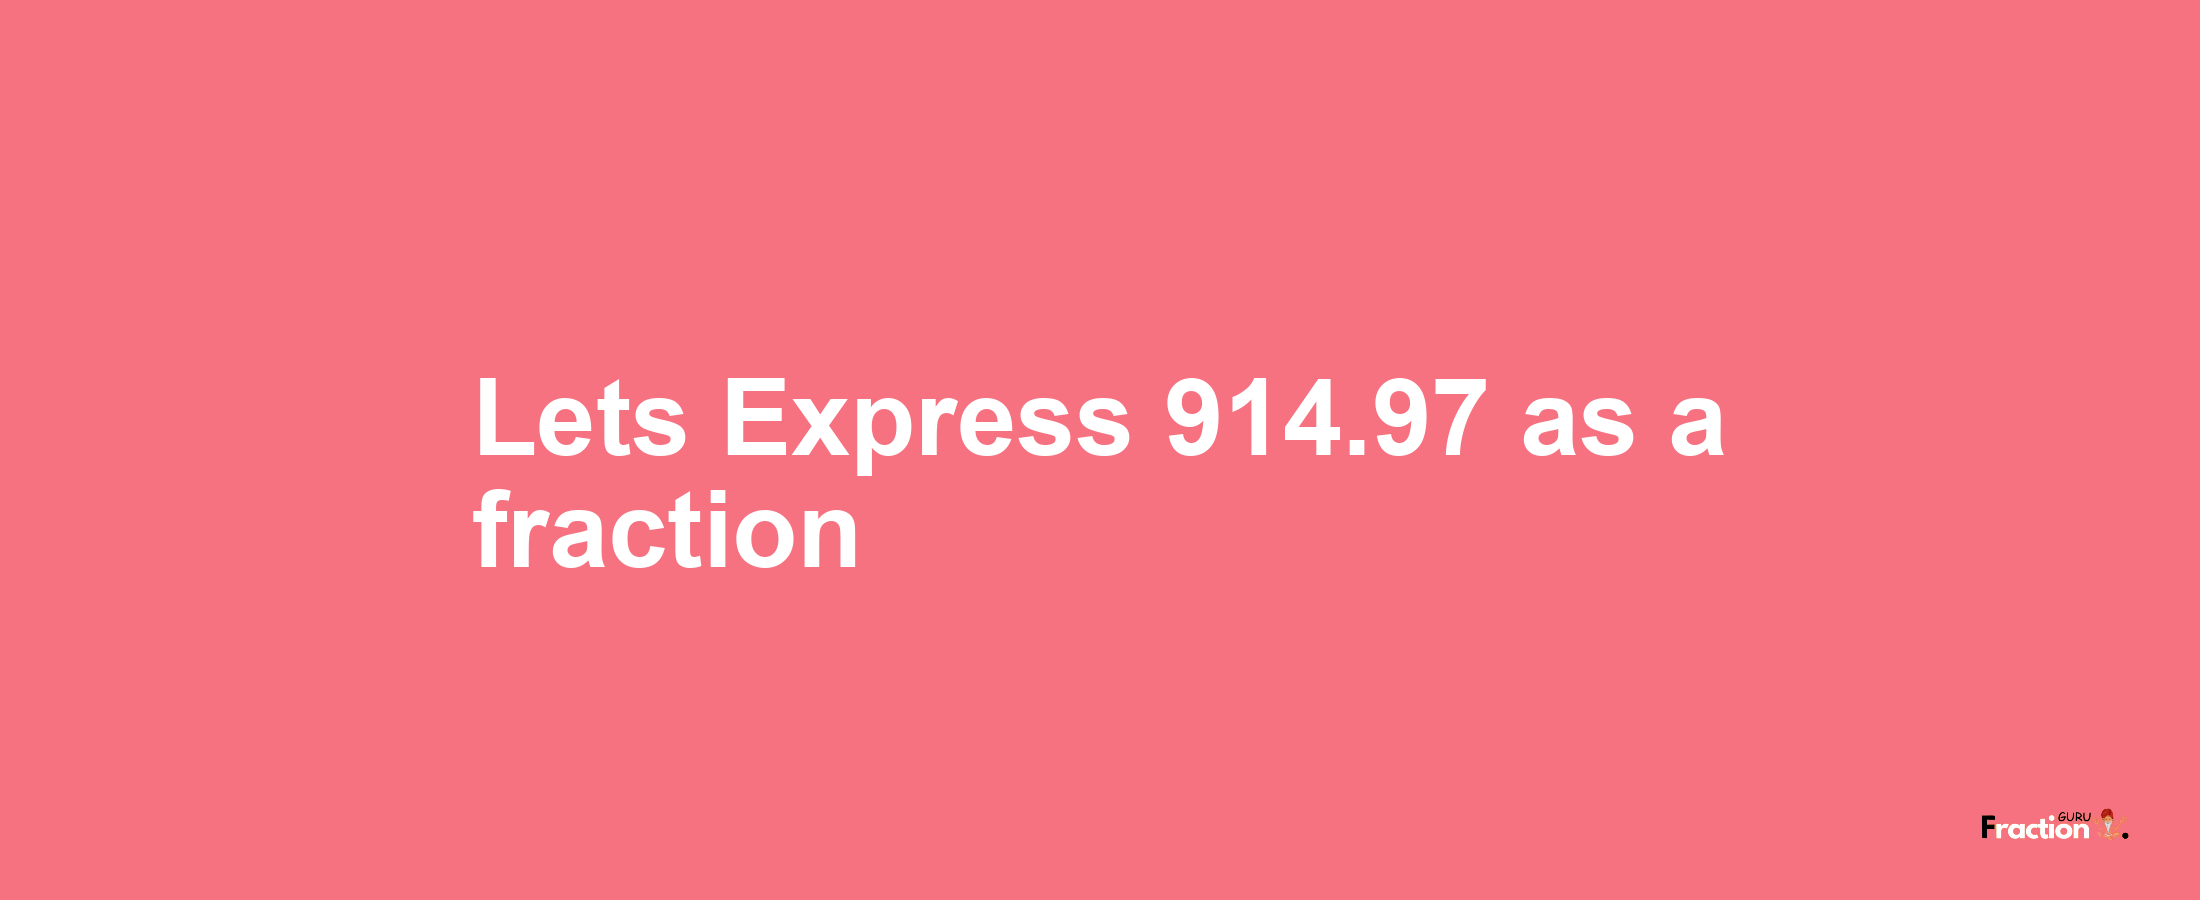 Lets Express 914.97 as afraction